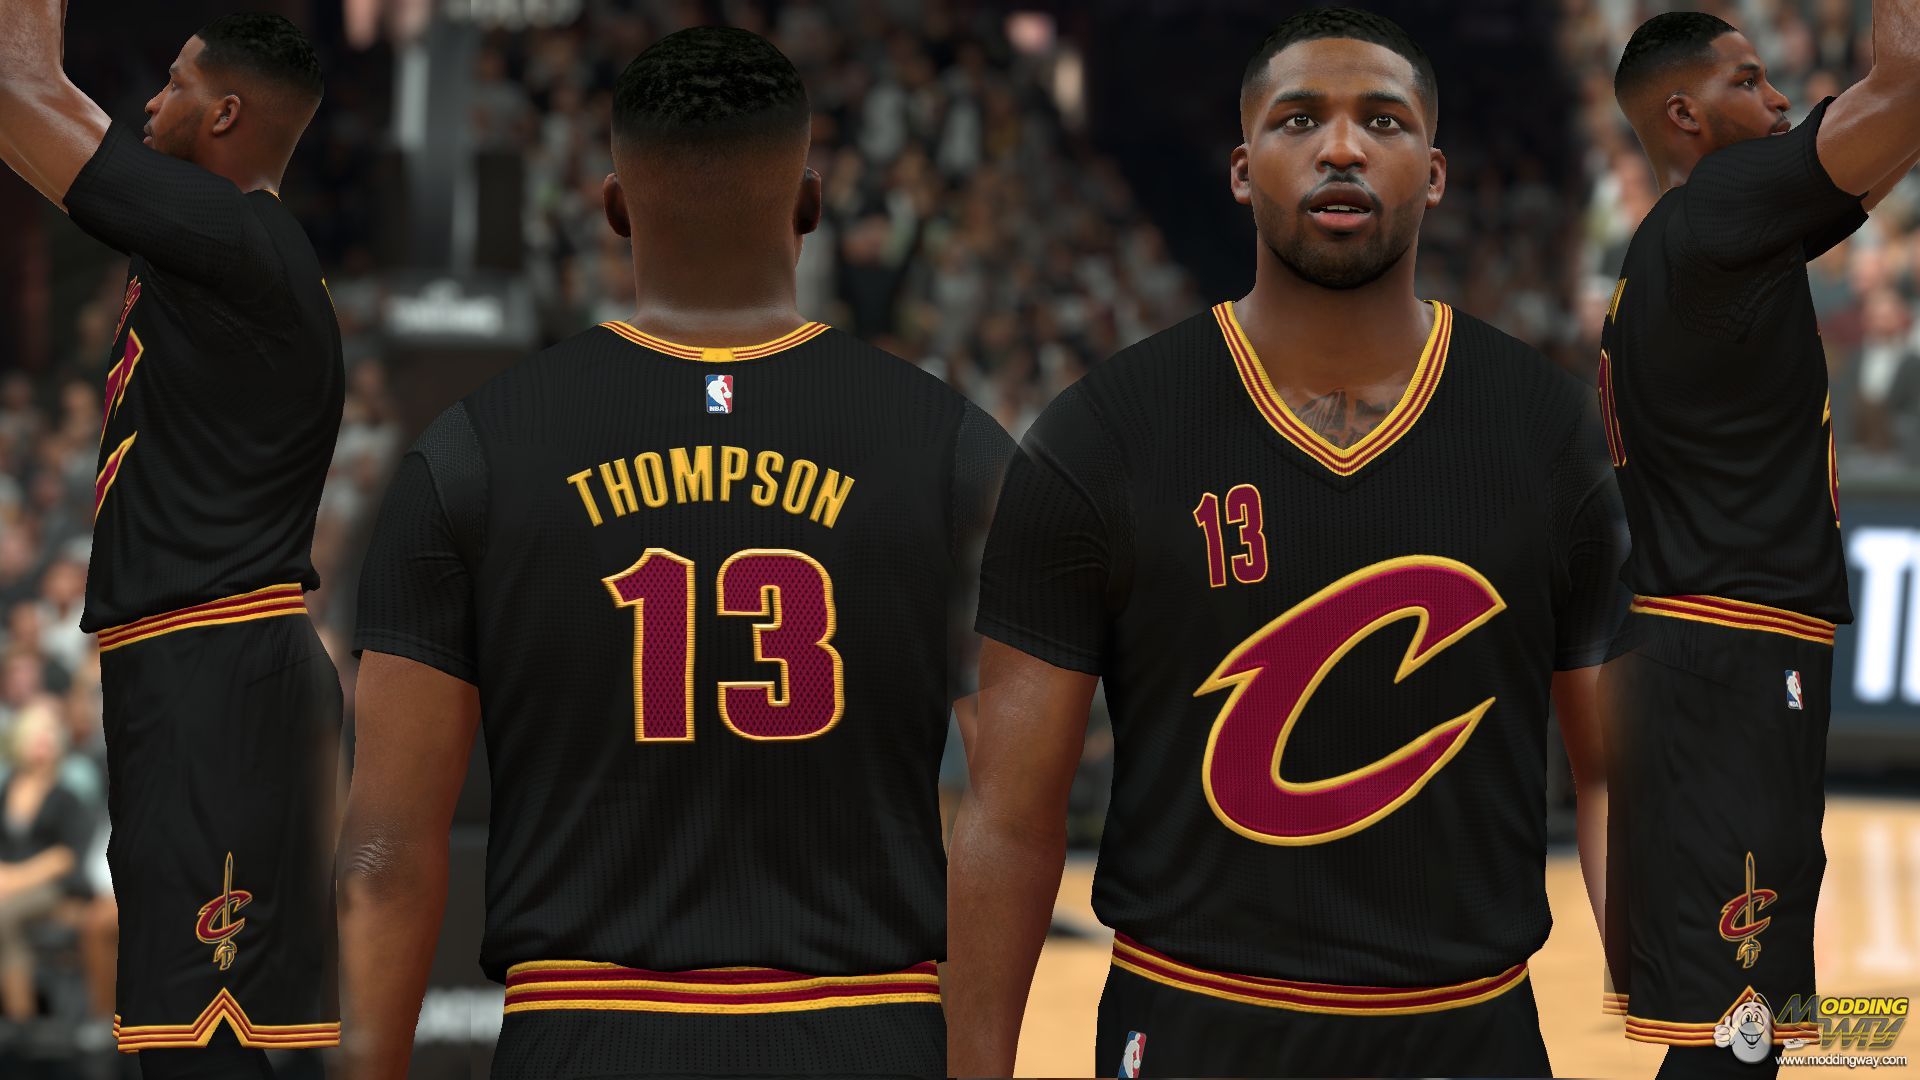 Cleveland Cavaliers pride jersey - NBA 